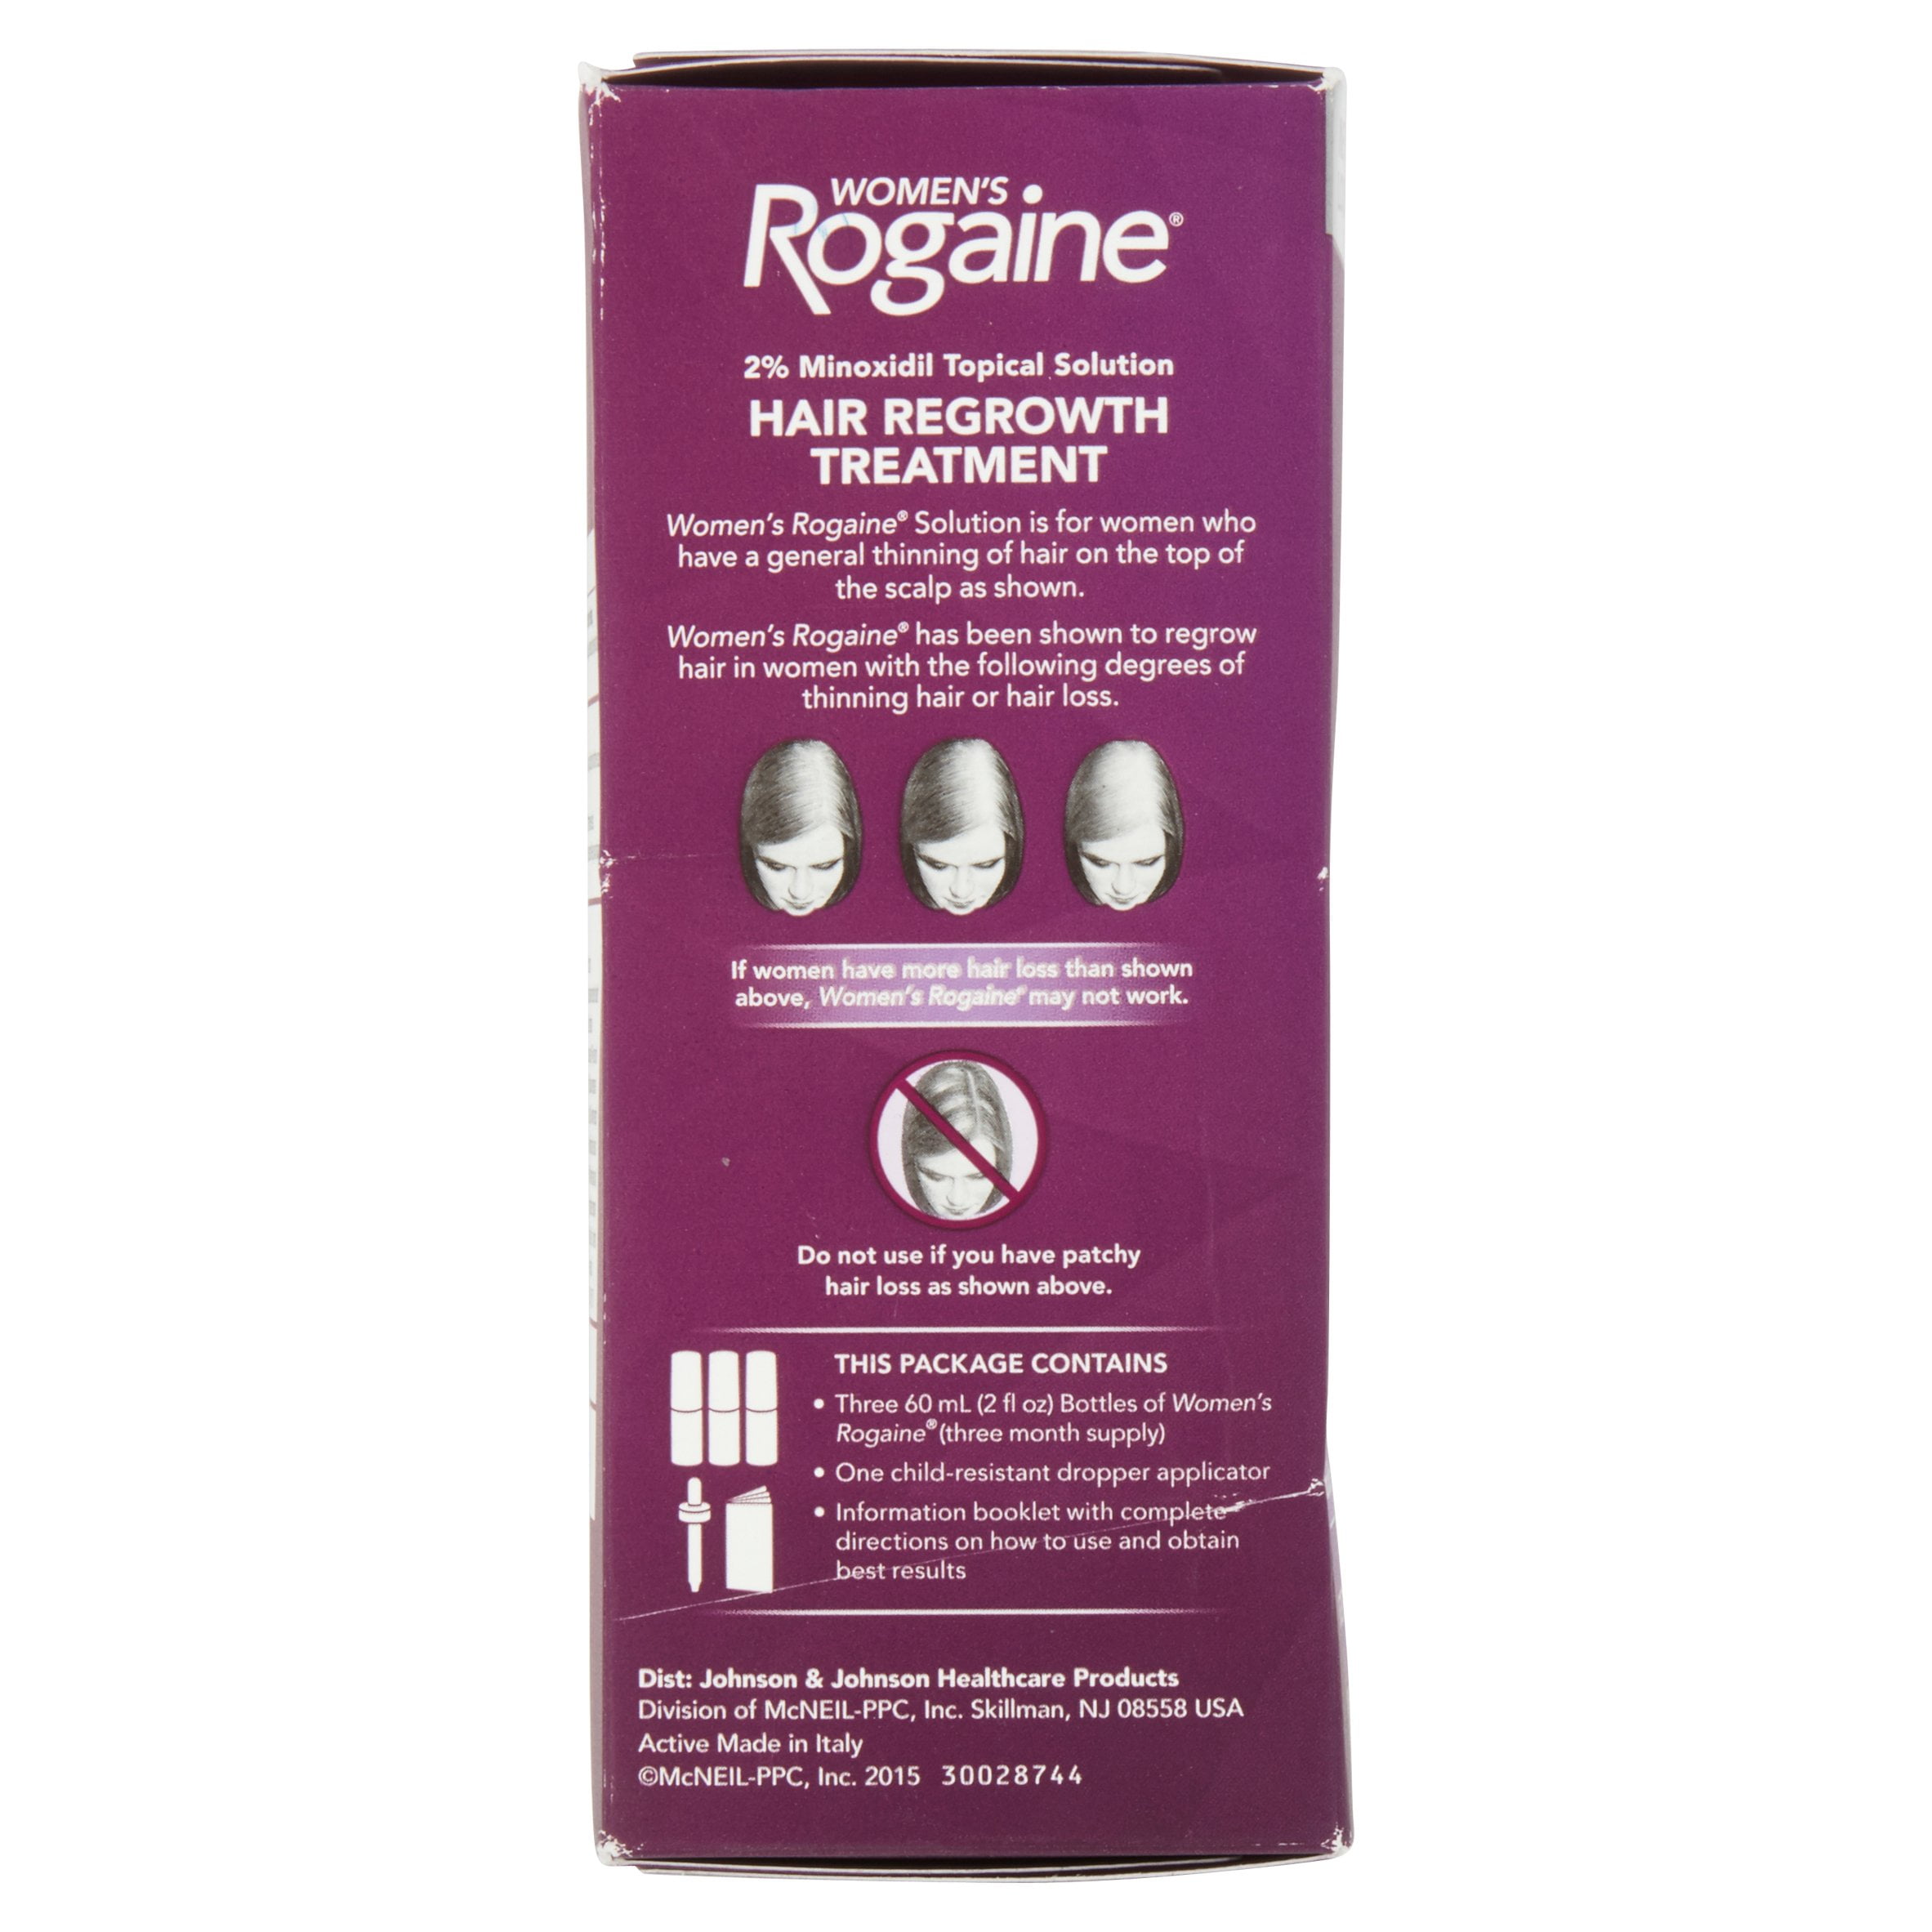 Where is Rogaine effective at growing hair?